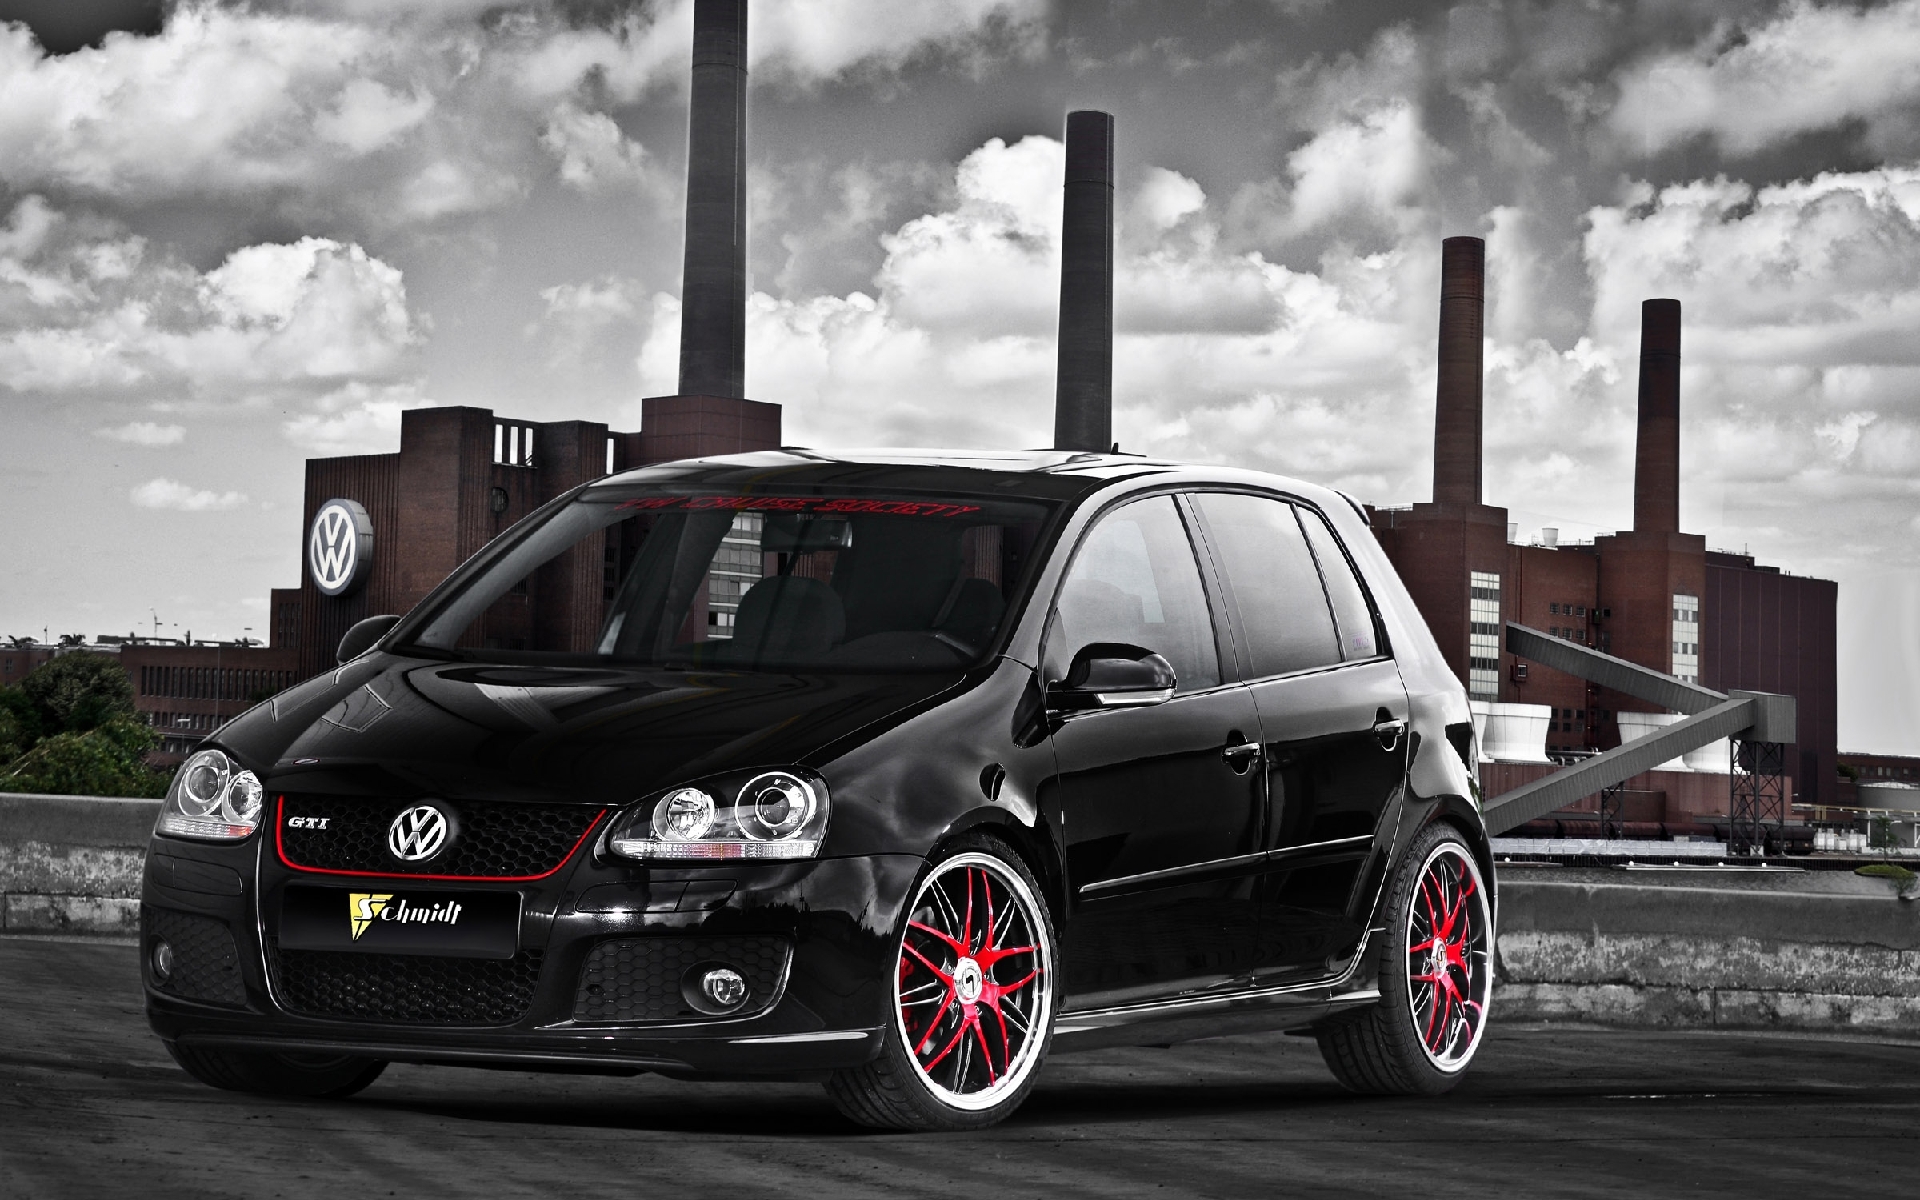 49763 2560x1600 PC pictures for free, download transport, volkswagen, auto 2560x1600 wallpapers on your desktop